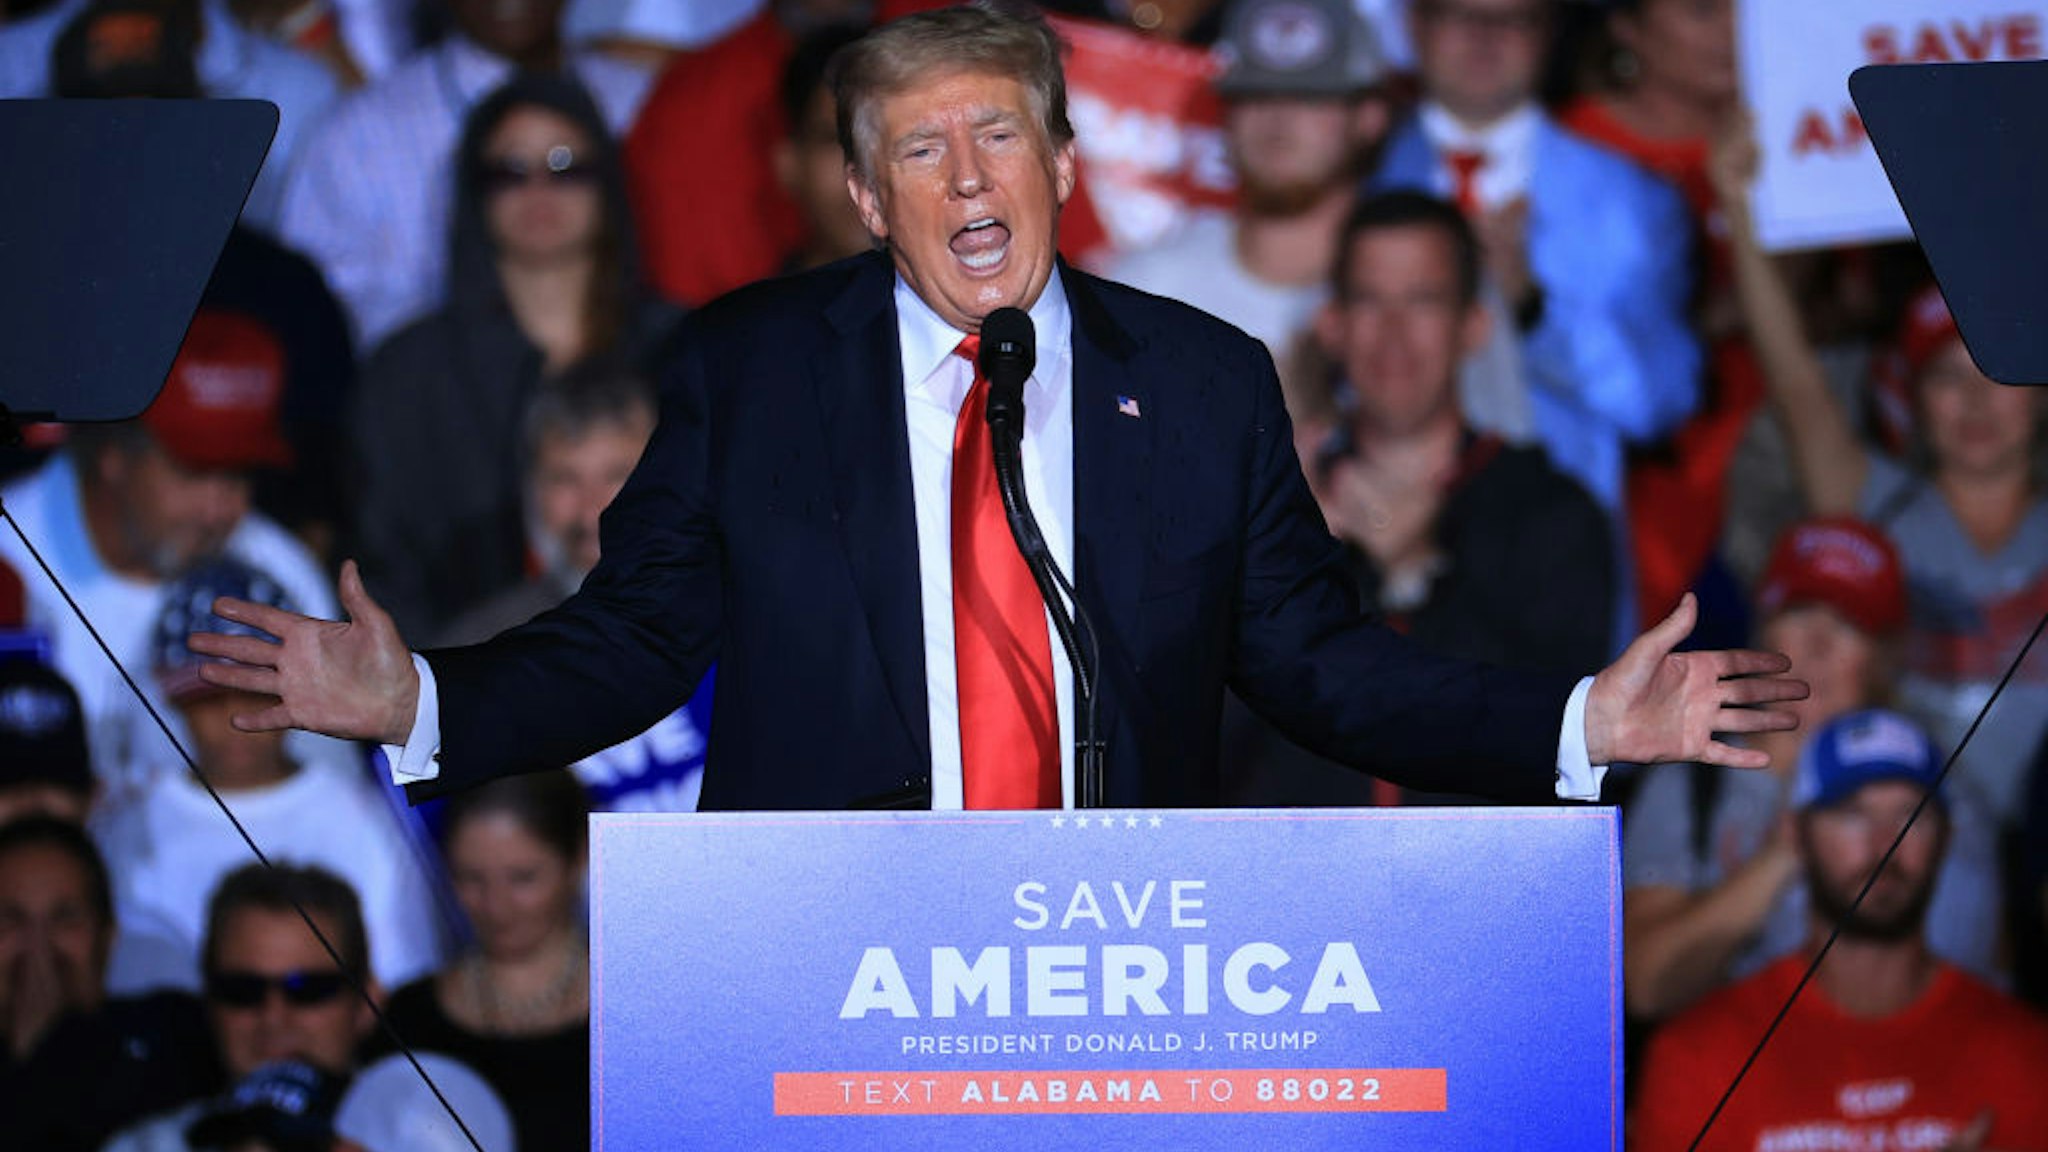 Former U.S. President Donald Trump addresses supporters during a "Save America" rally at York Family Farms on August 21, 2021 in Cullman, Alabama.